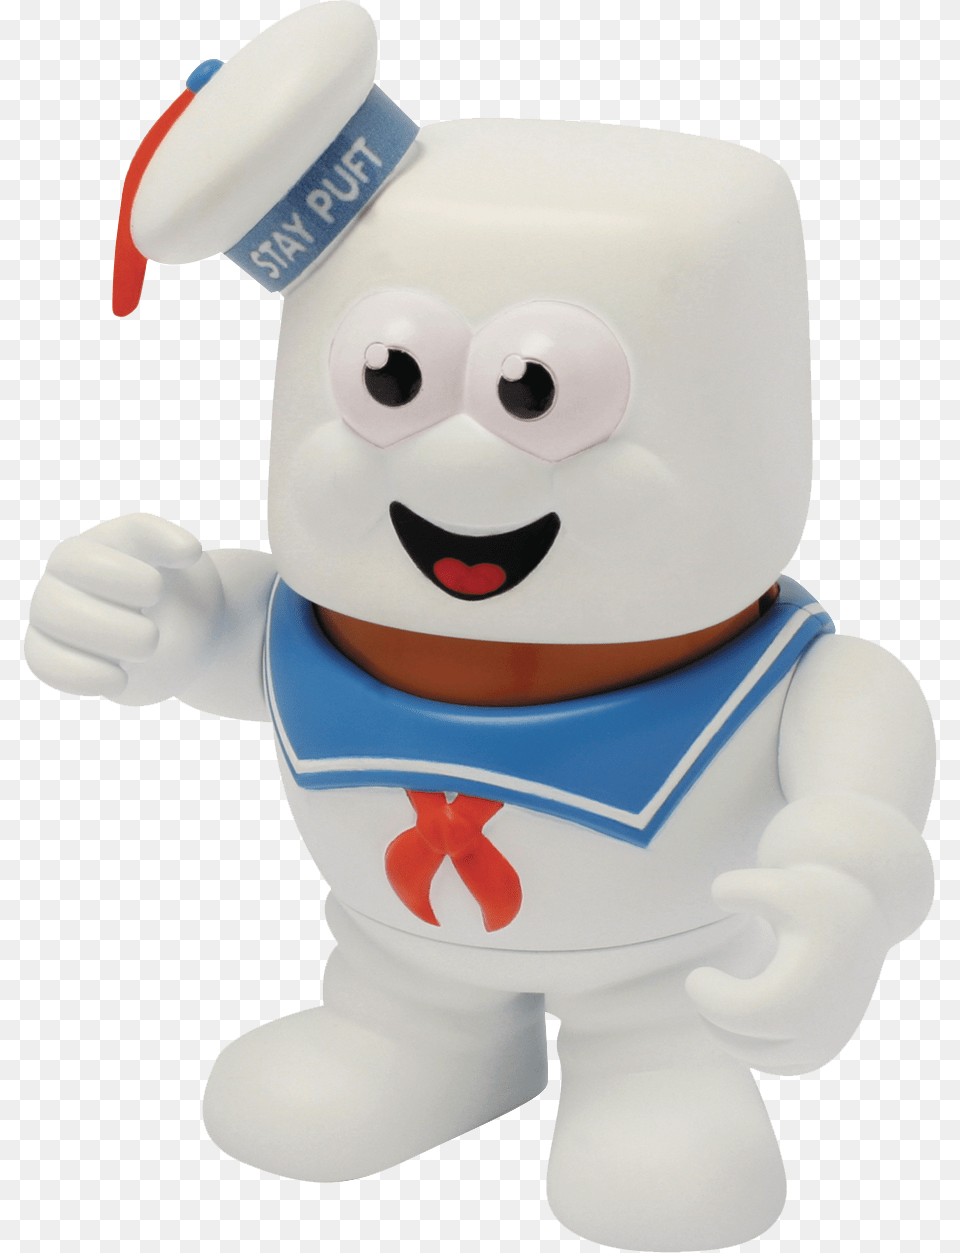 Stay Puft Marshmallow Man, Toy, Figurine Free Transparent Png